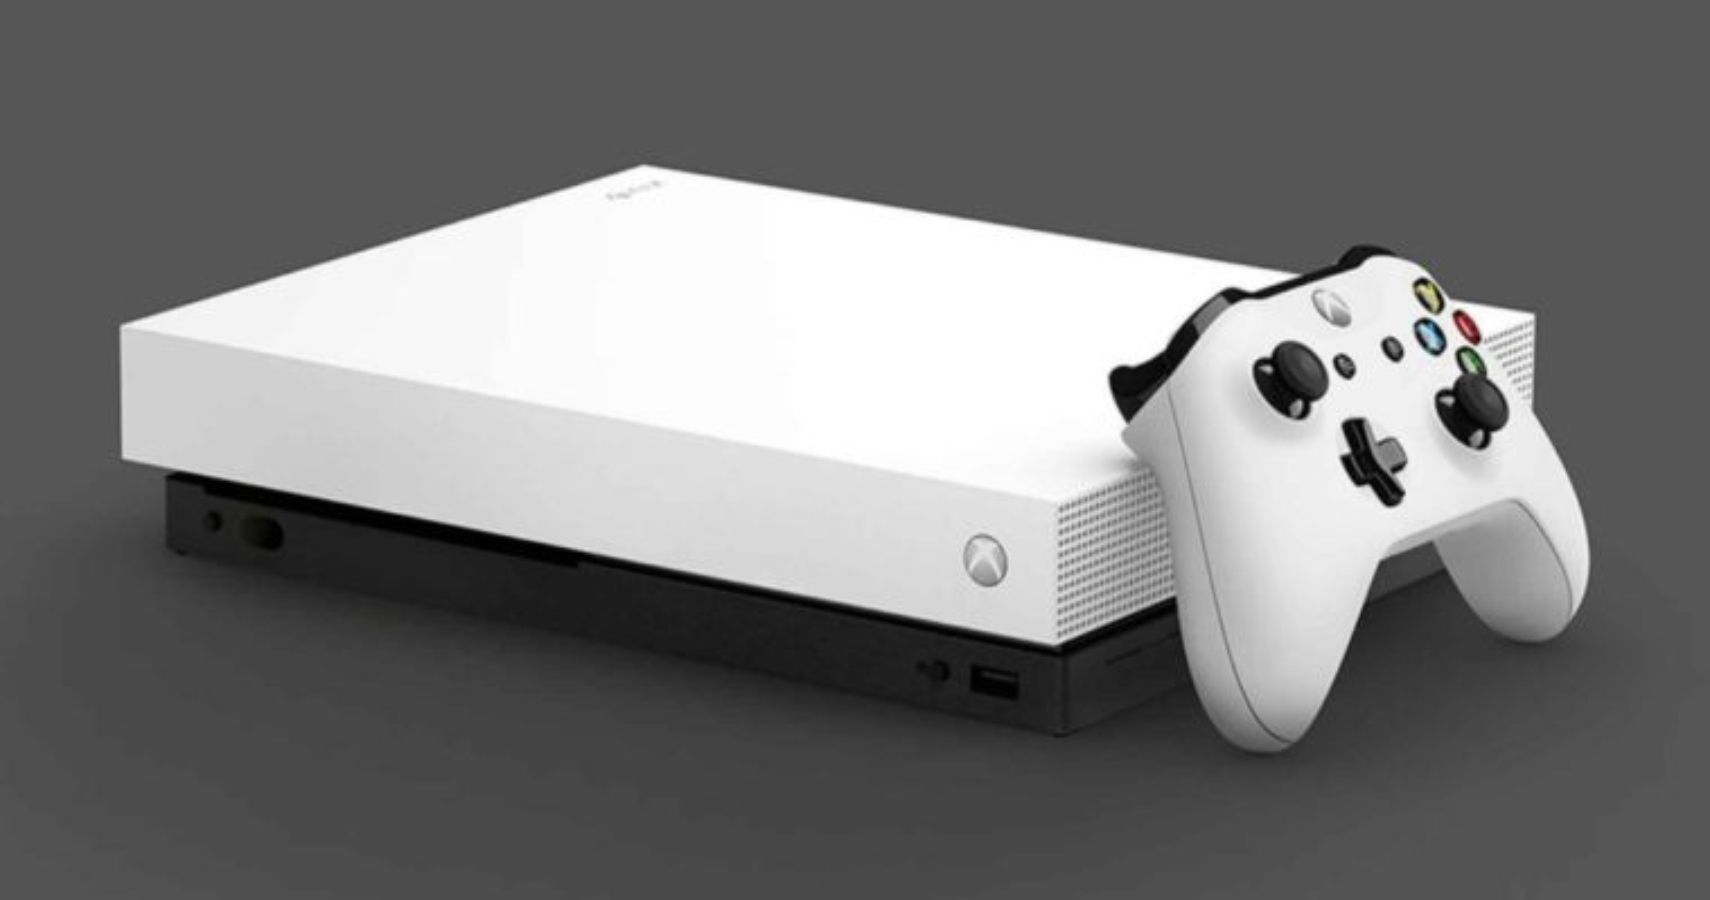 Rumor: Disc-Less Xbox One Set For Surprise May Release